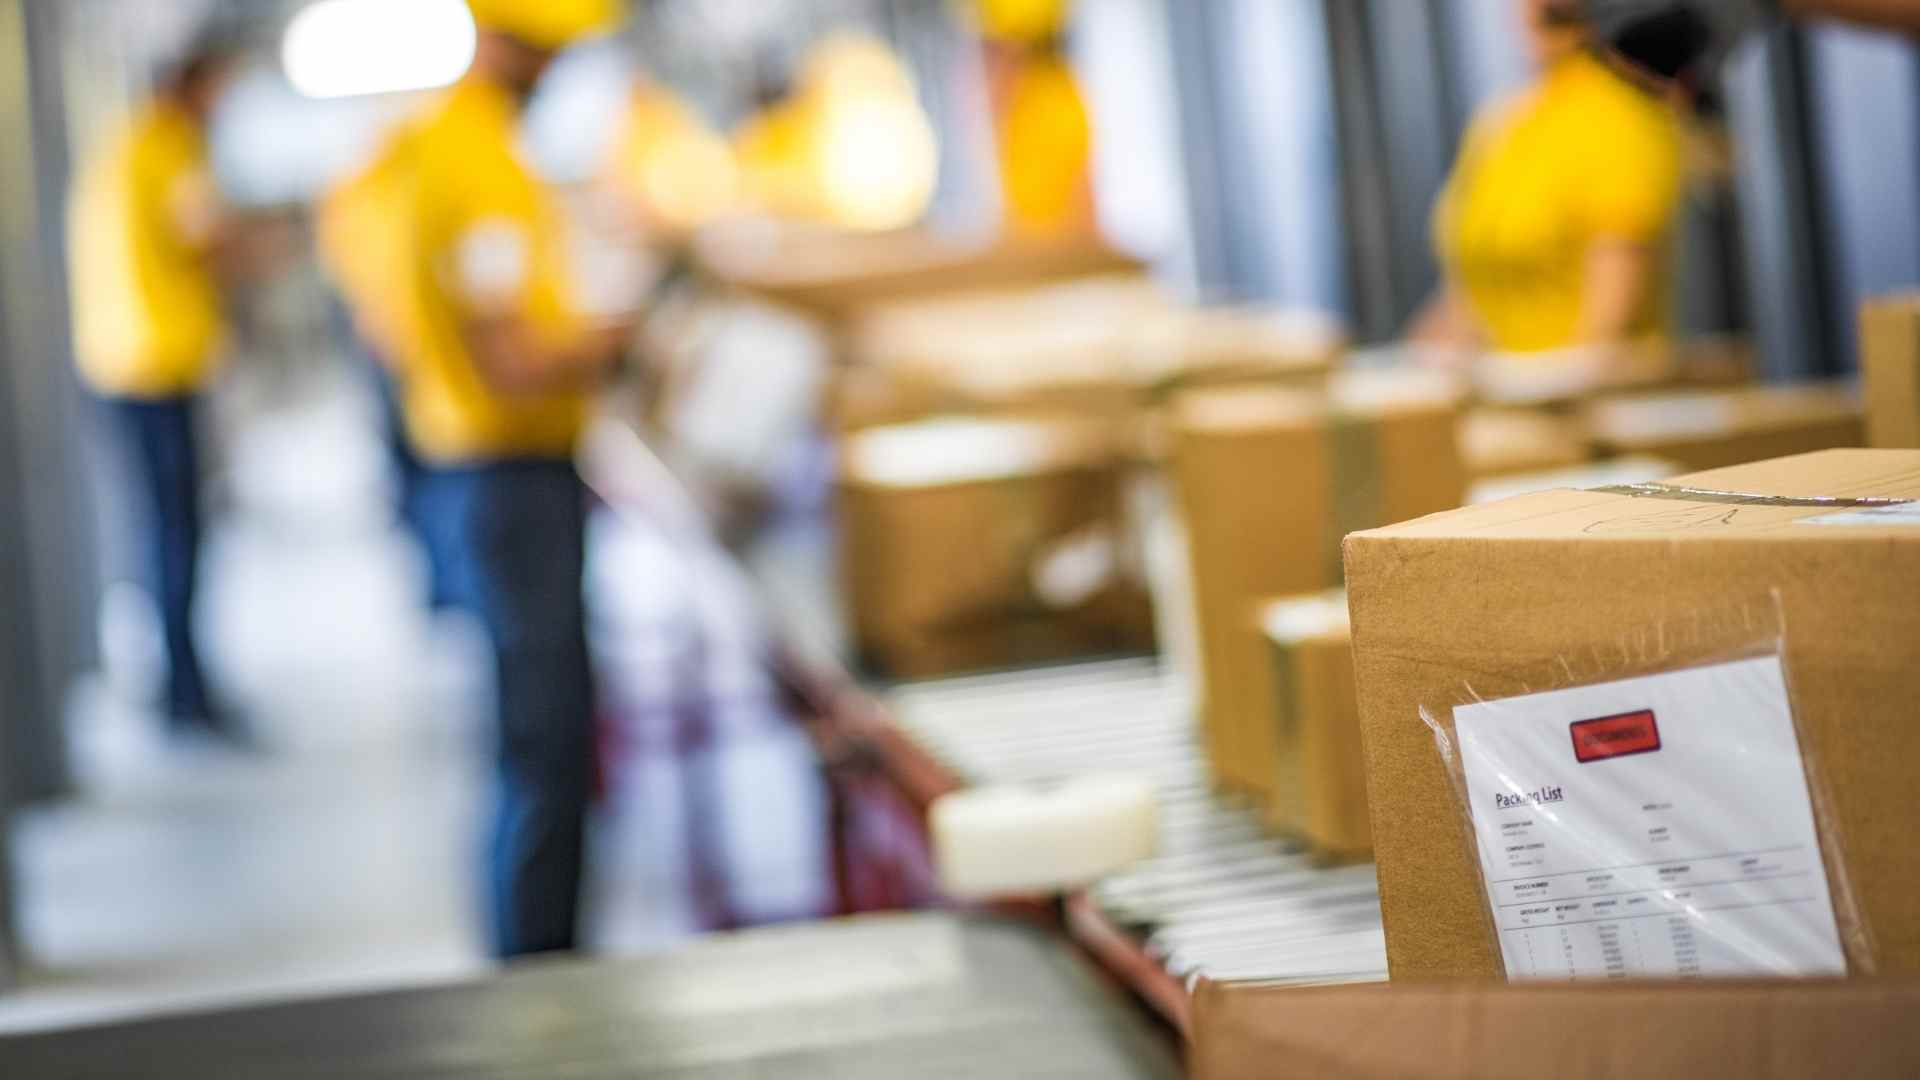 FBA vs. FBM: Which to choose for your Amazon fulfillment strategy?